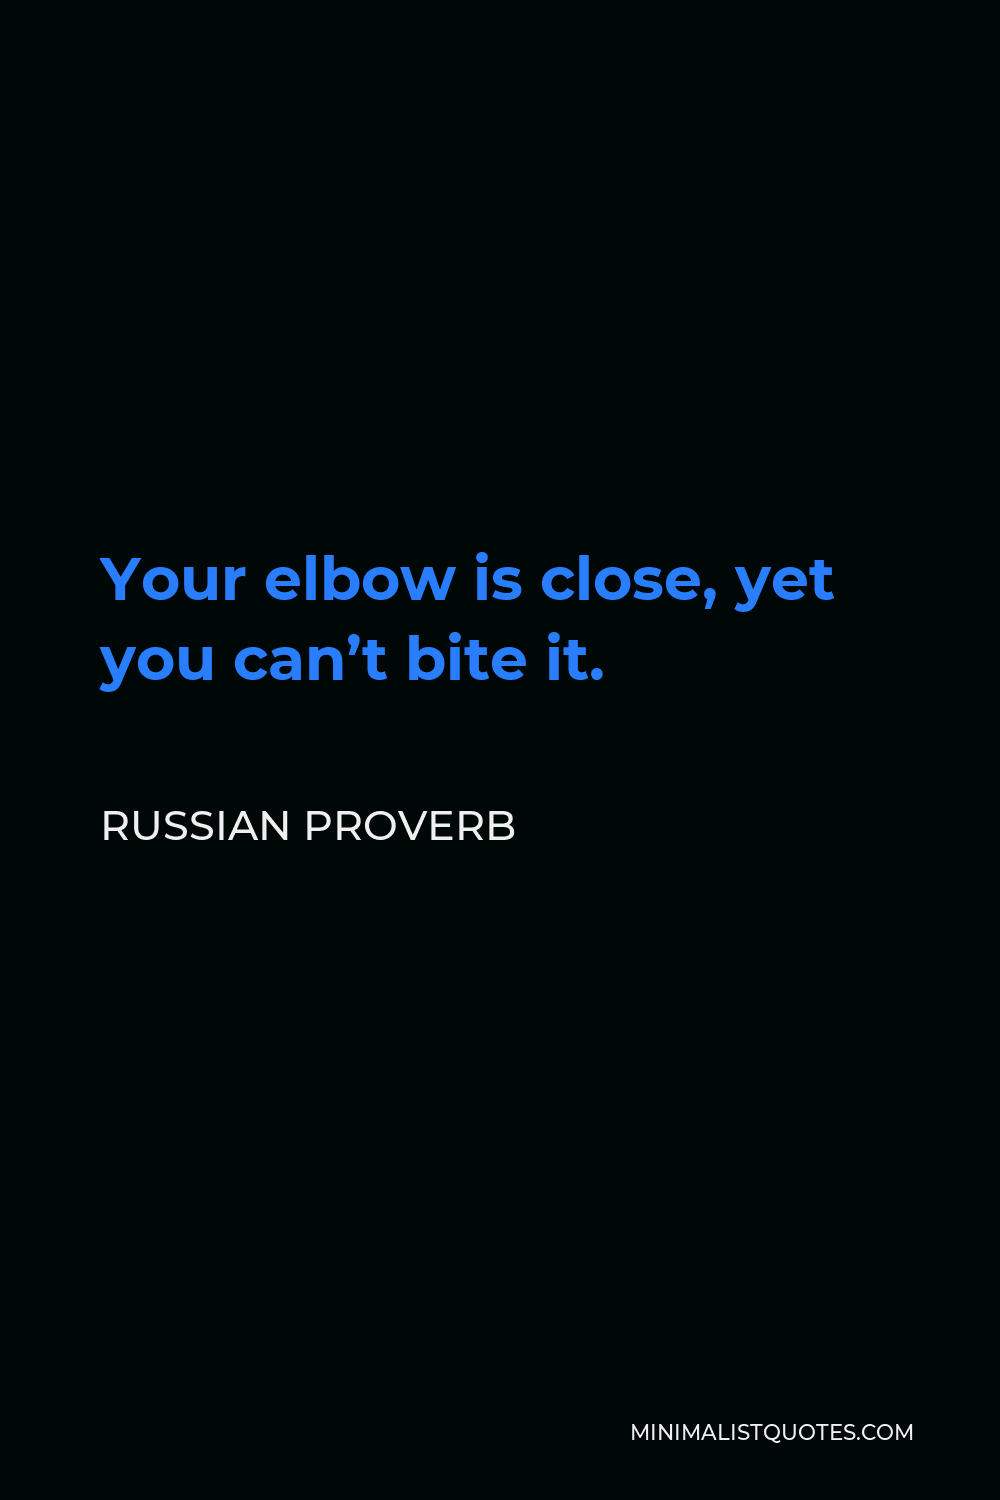 Russian Proverb Quote - Your elbow is close, yet you can’t bite it.